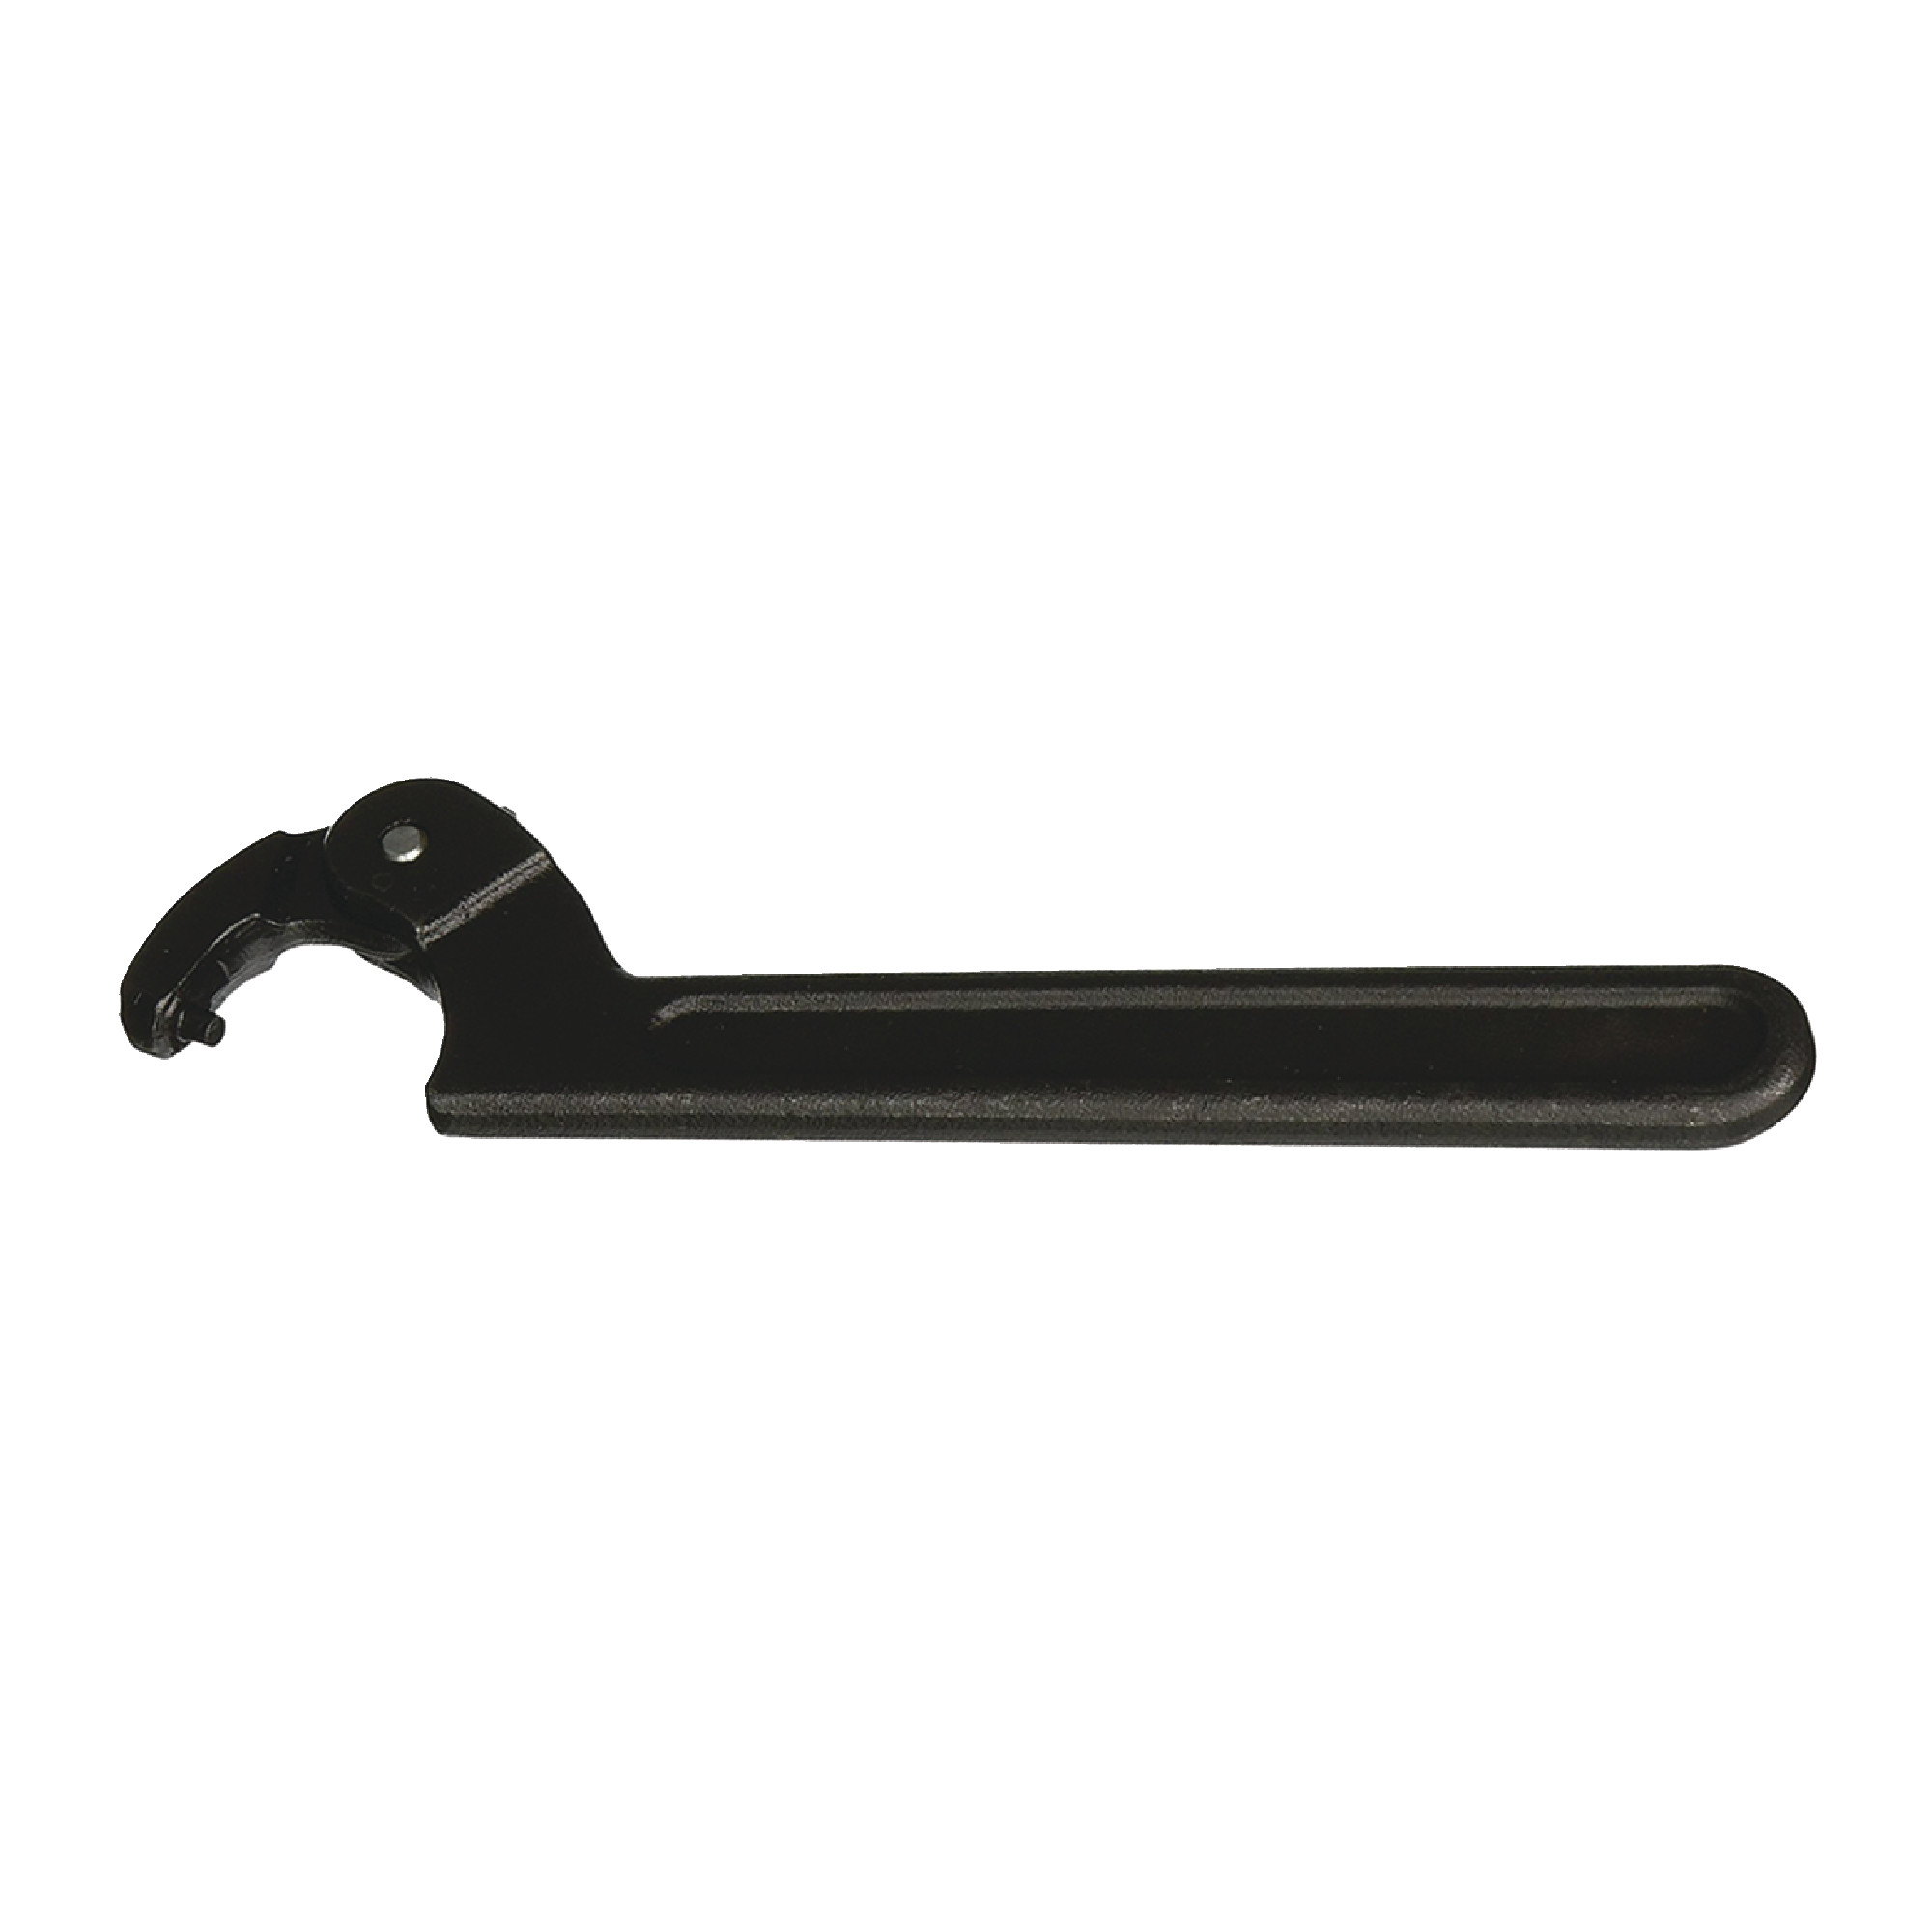 Adjustable Pin Spanner Wrench - Model: O-471  Diameter: 3/4" - 2"  Overall Length: 5-3/8"